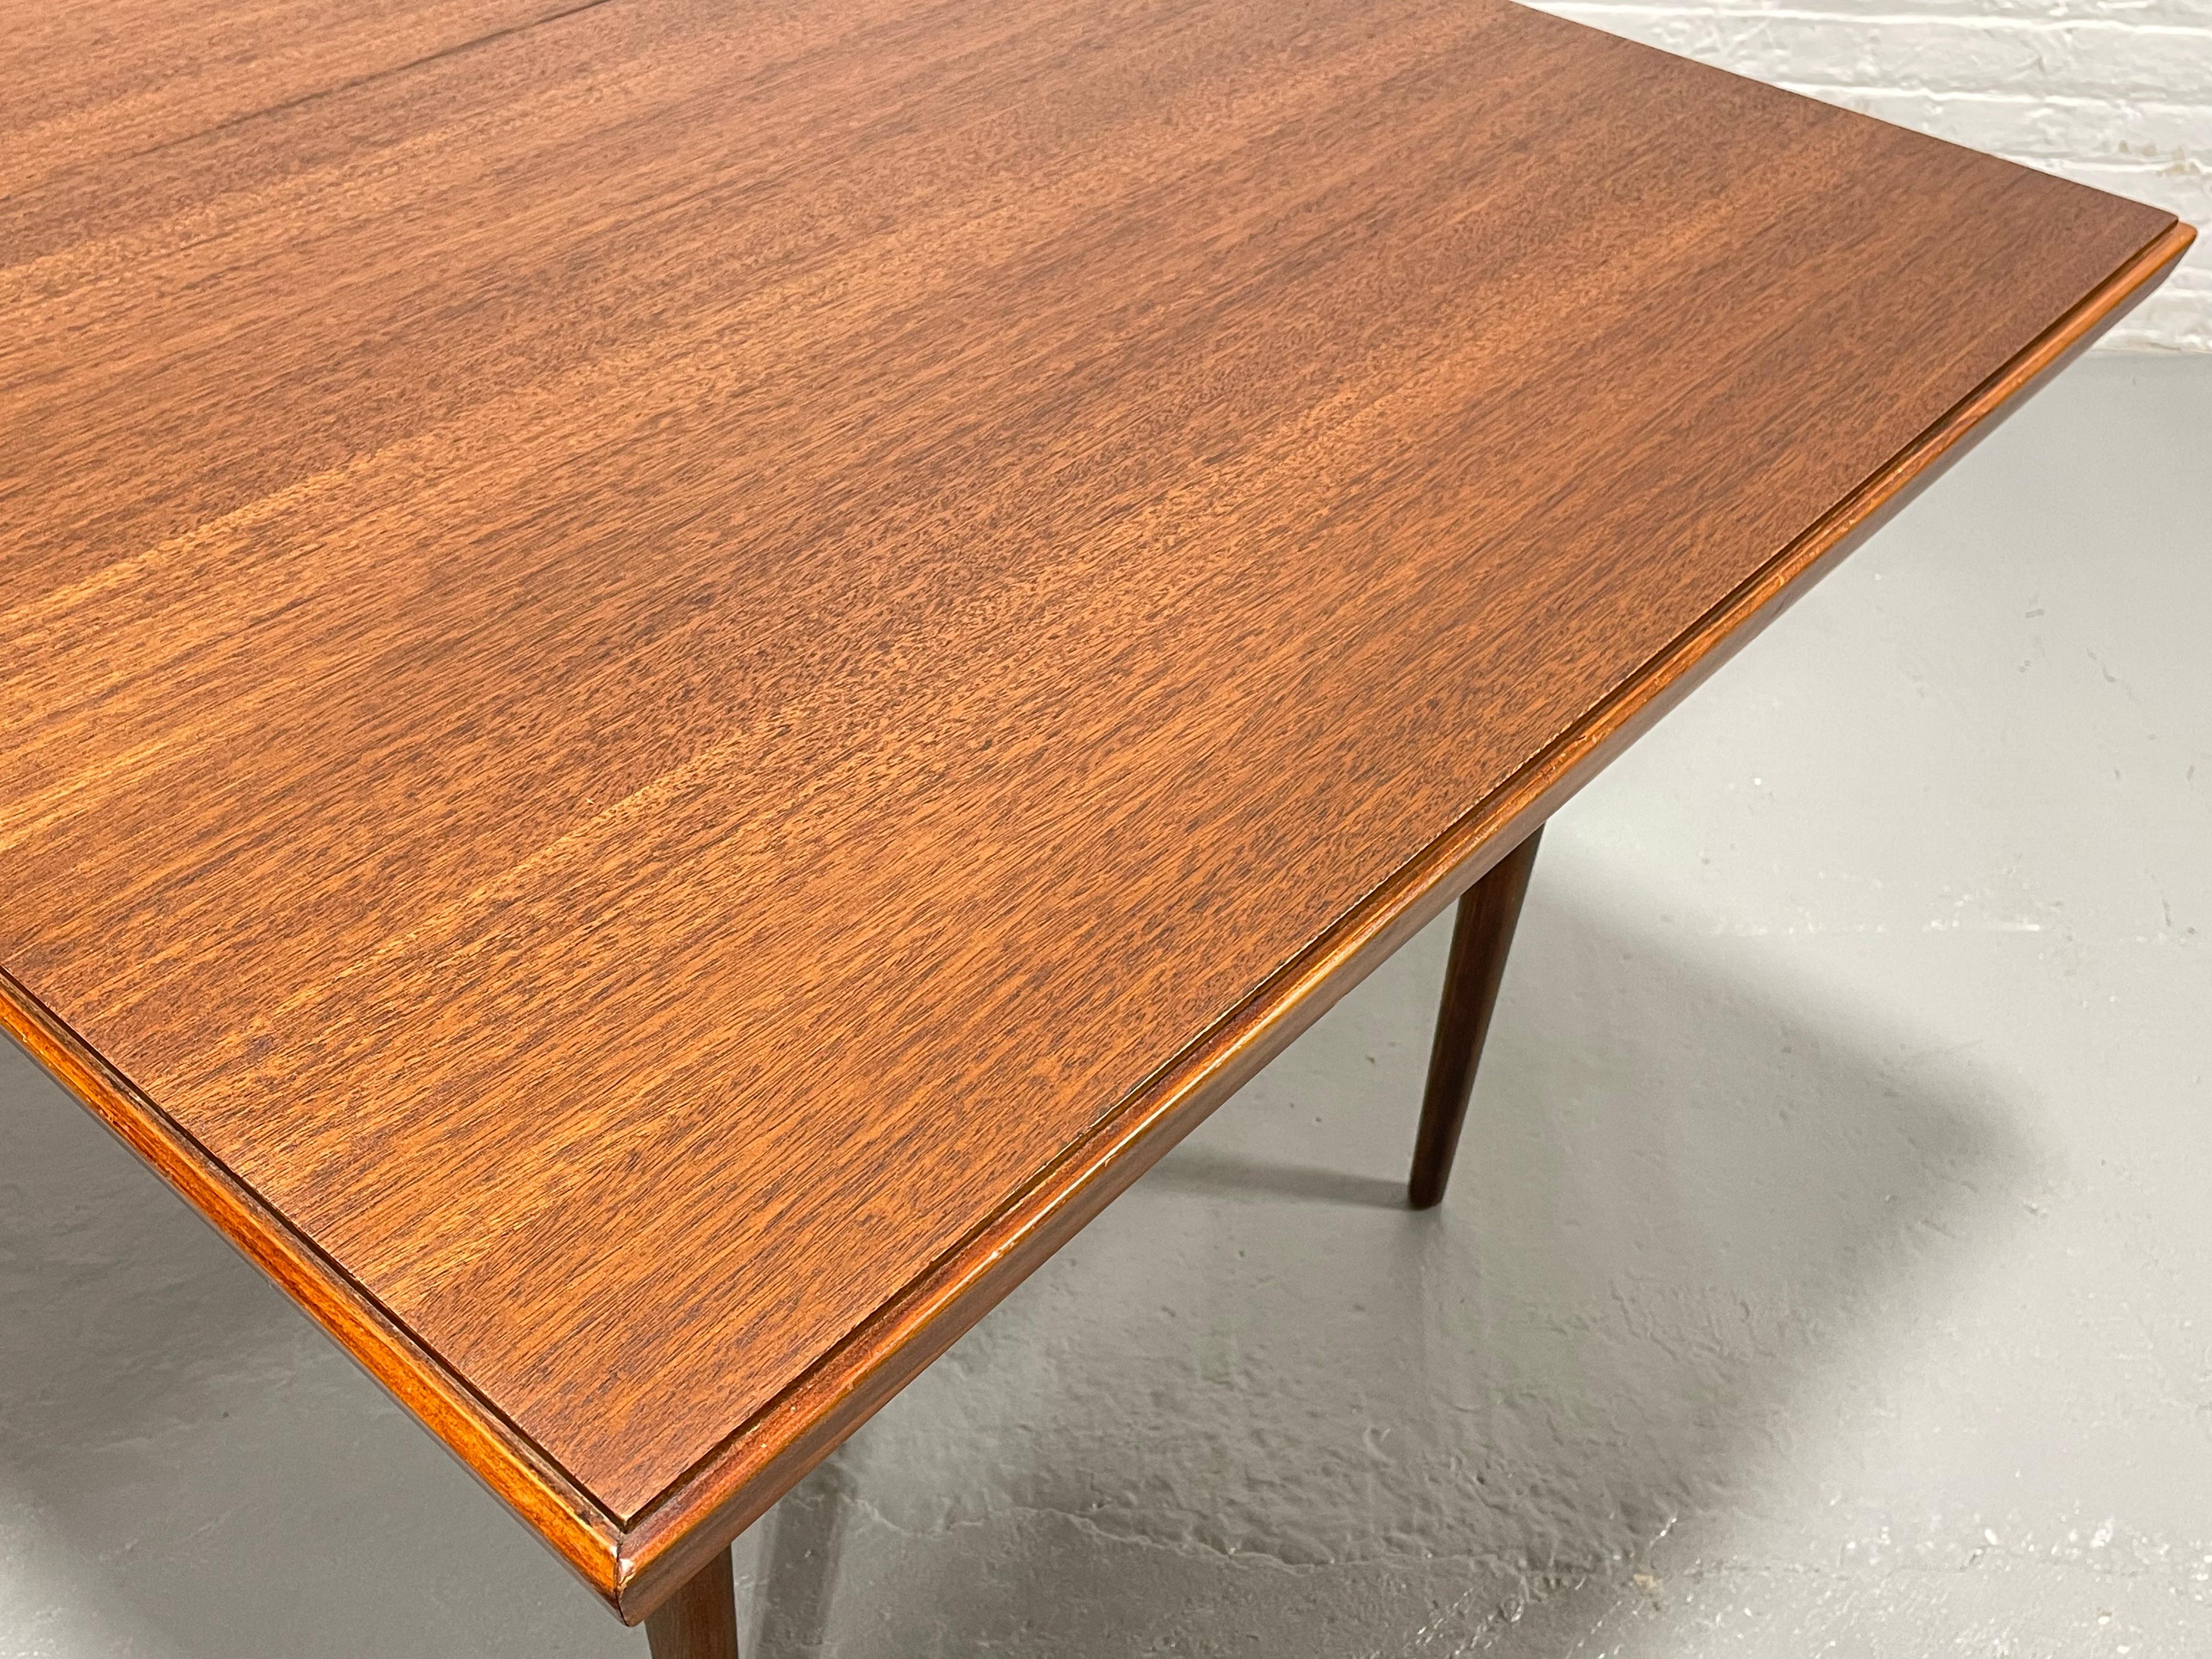 Walnut Perfect Size WALNUT Mid Century Modern DINING TABLE + Expansion Leaf, c. 1960's For Sale